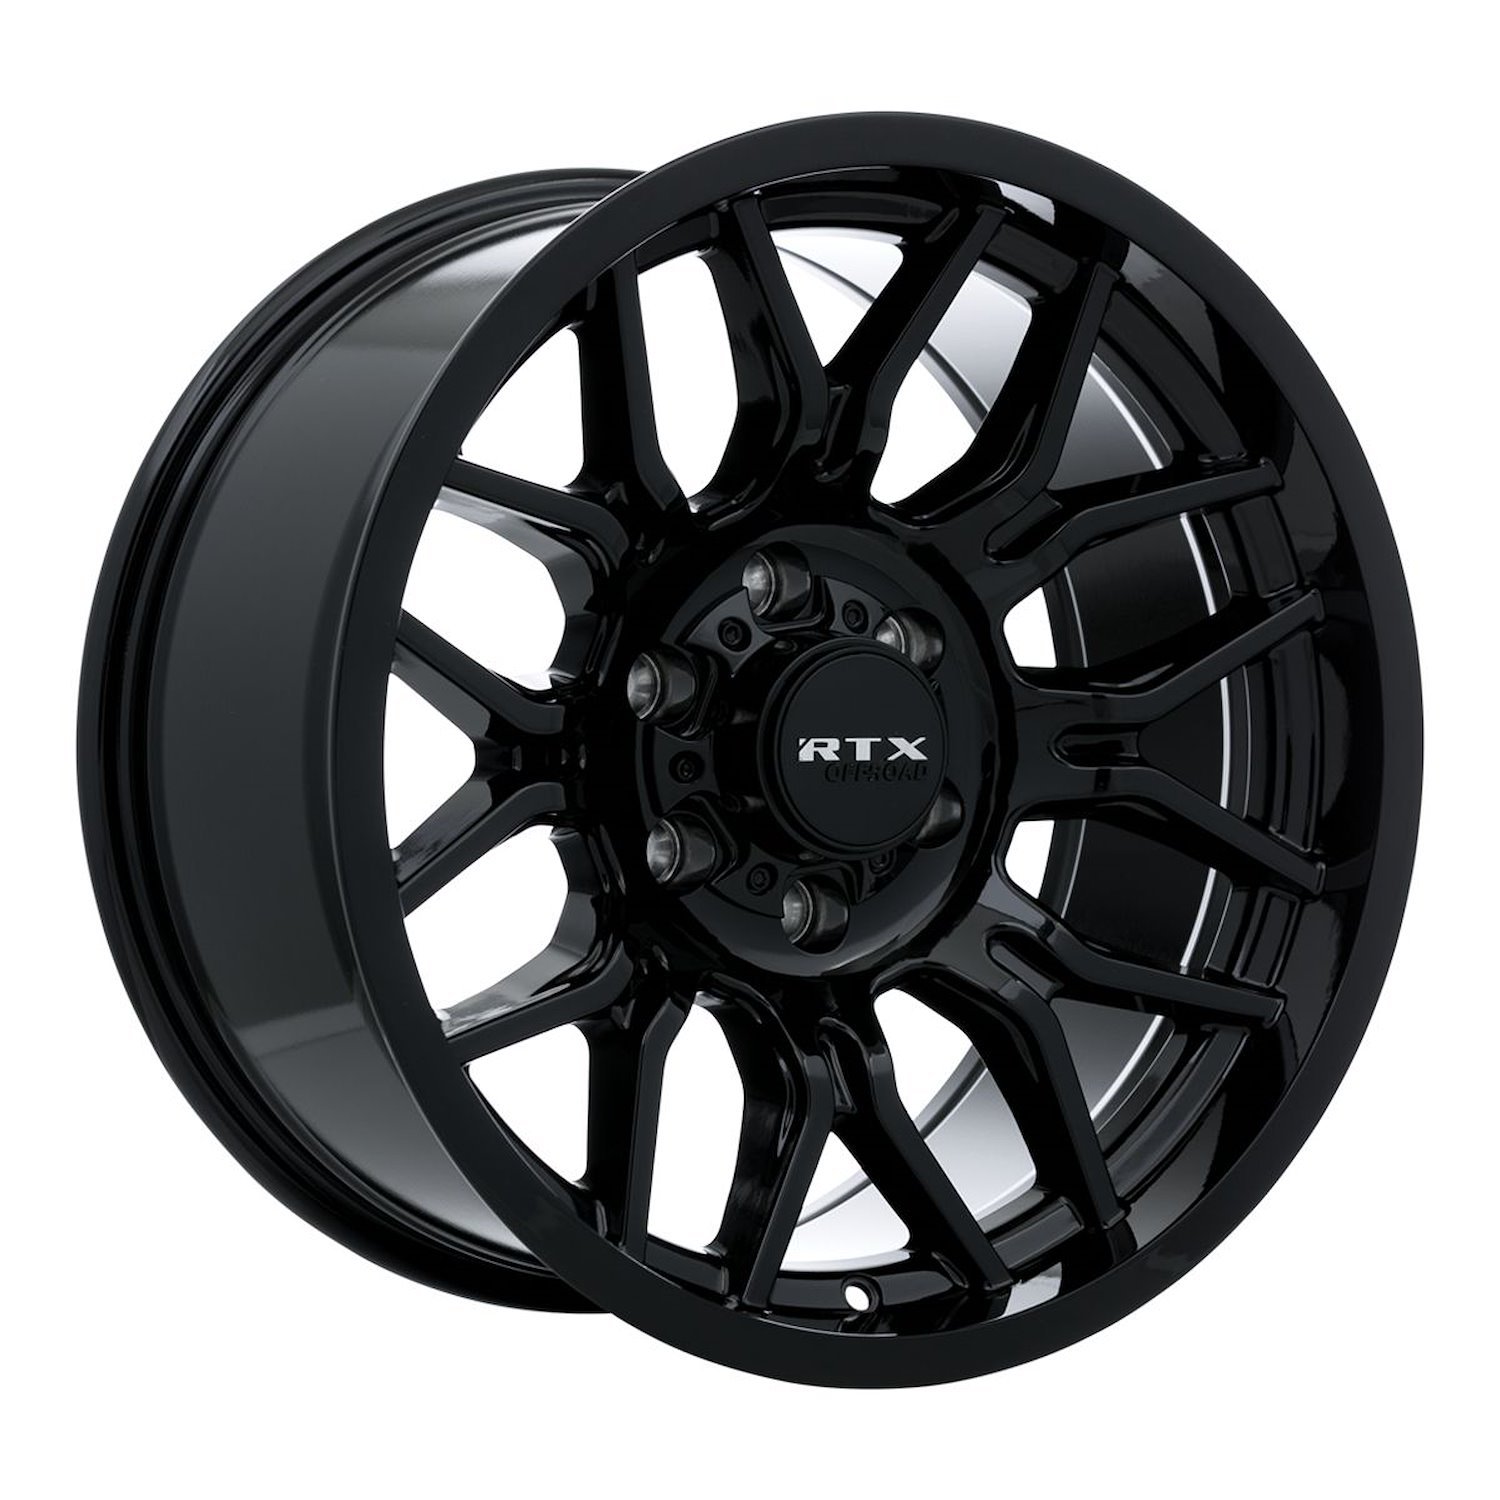 163747 Off-Road Series Claw Wheel [Size: 18" x 9"] Gloss Black Finish